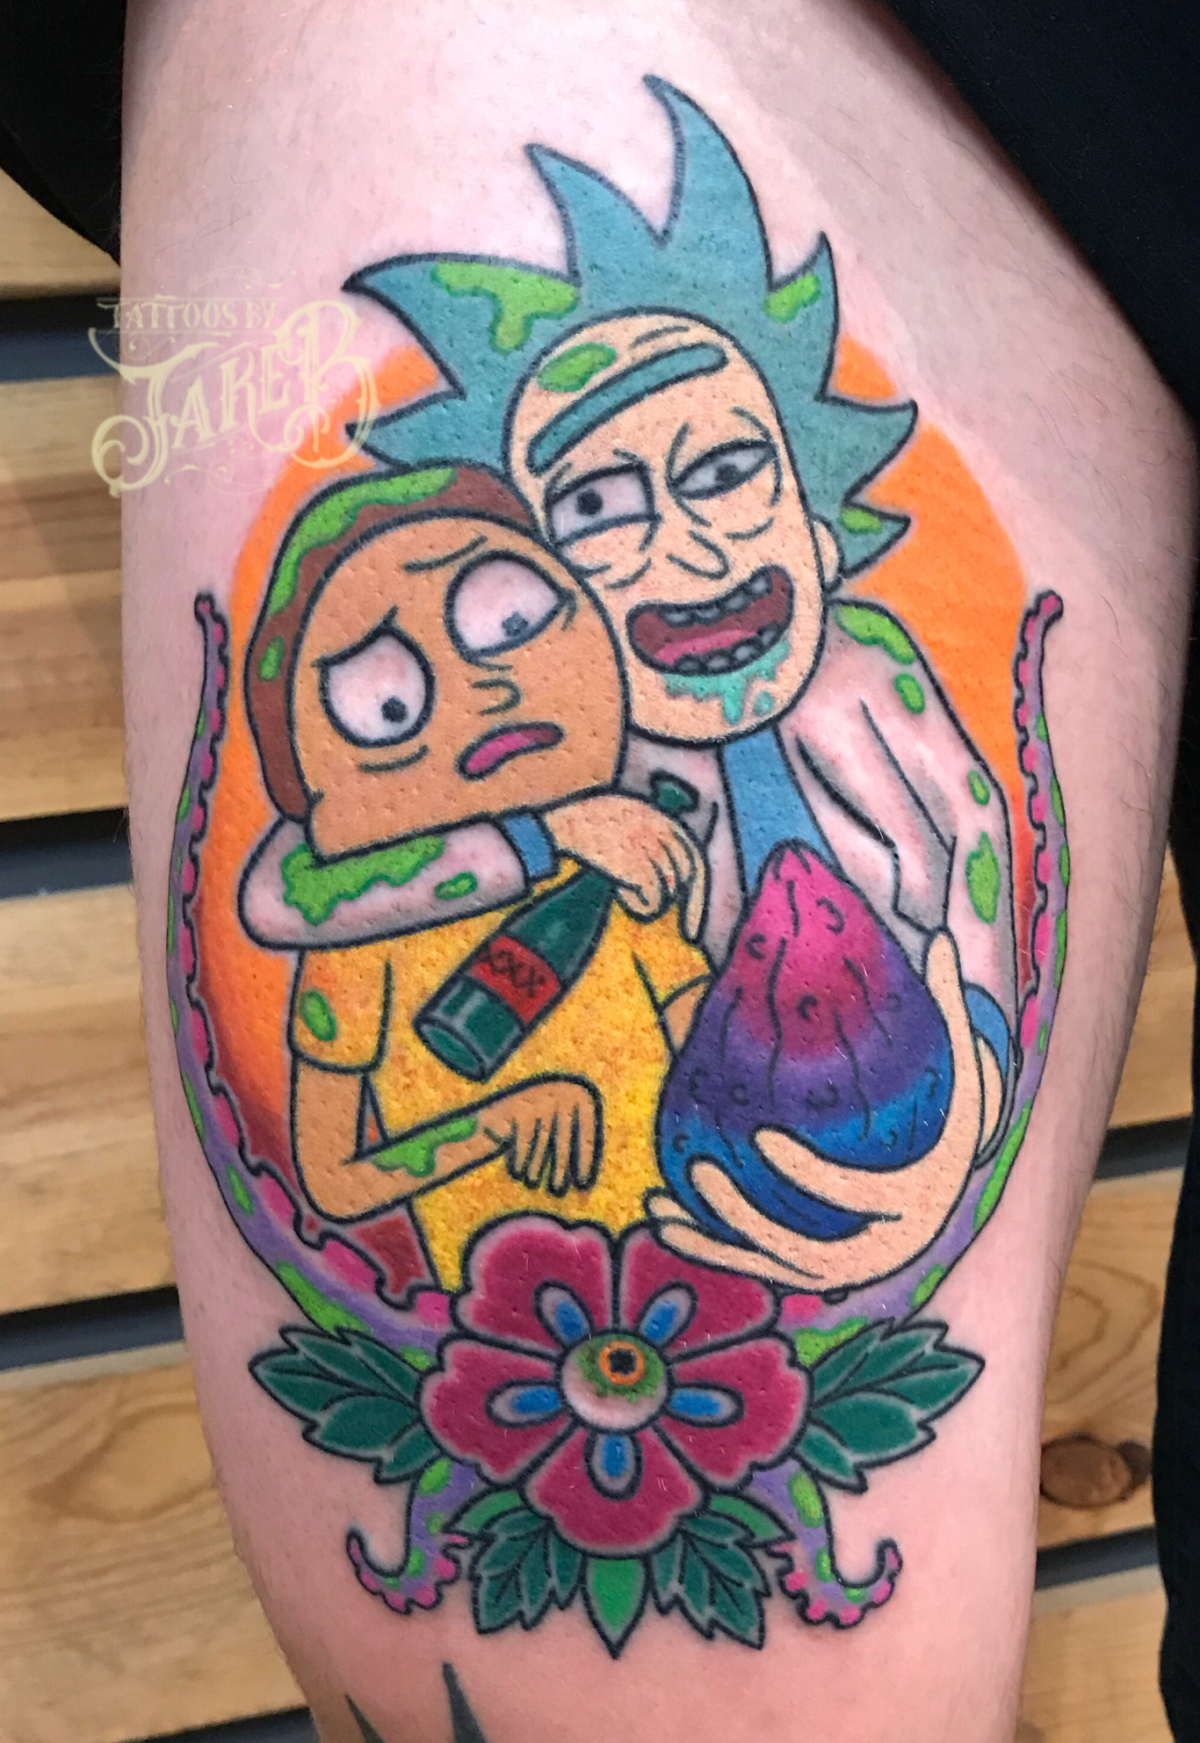 rick and morty tattoo by Jake B